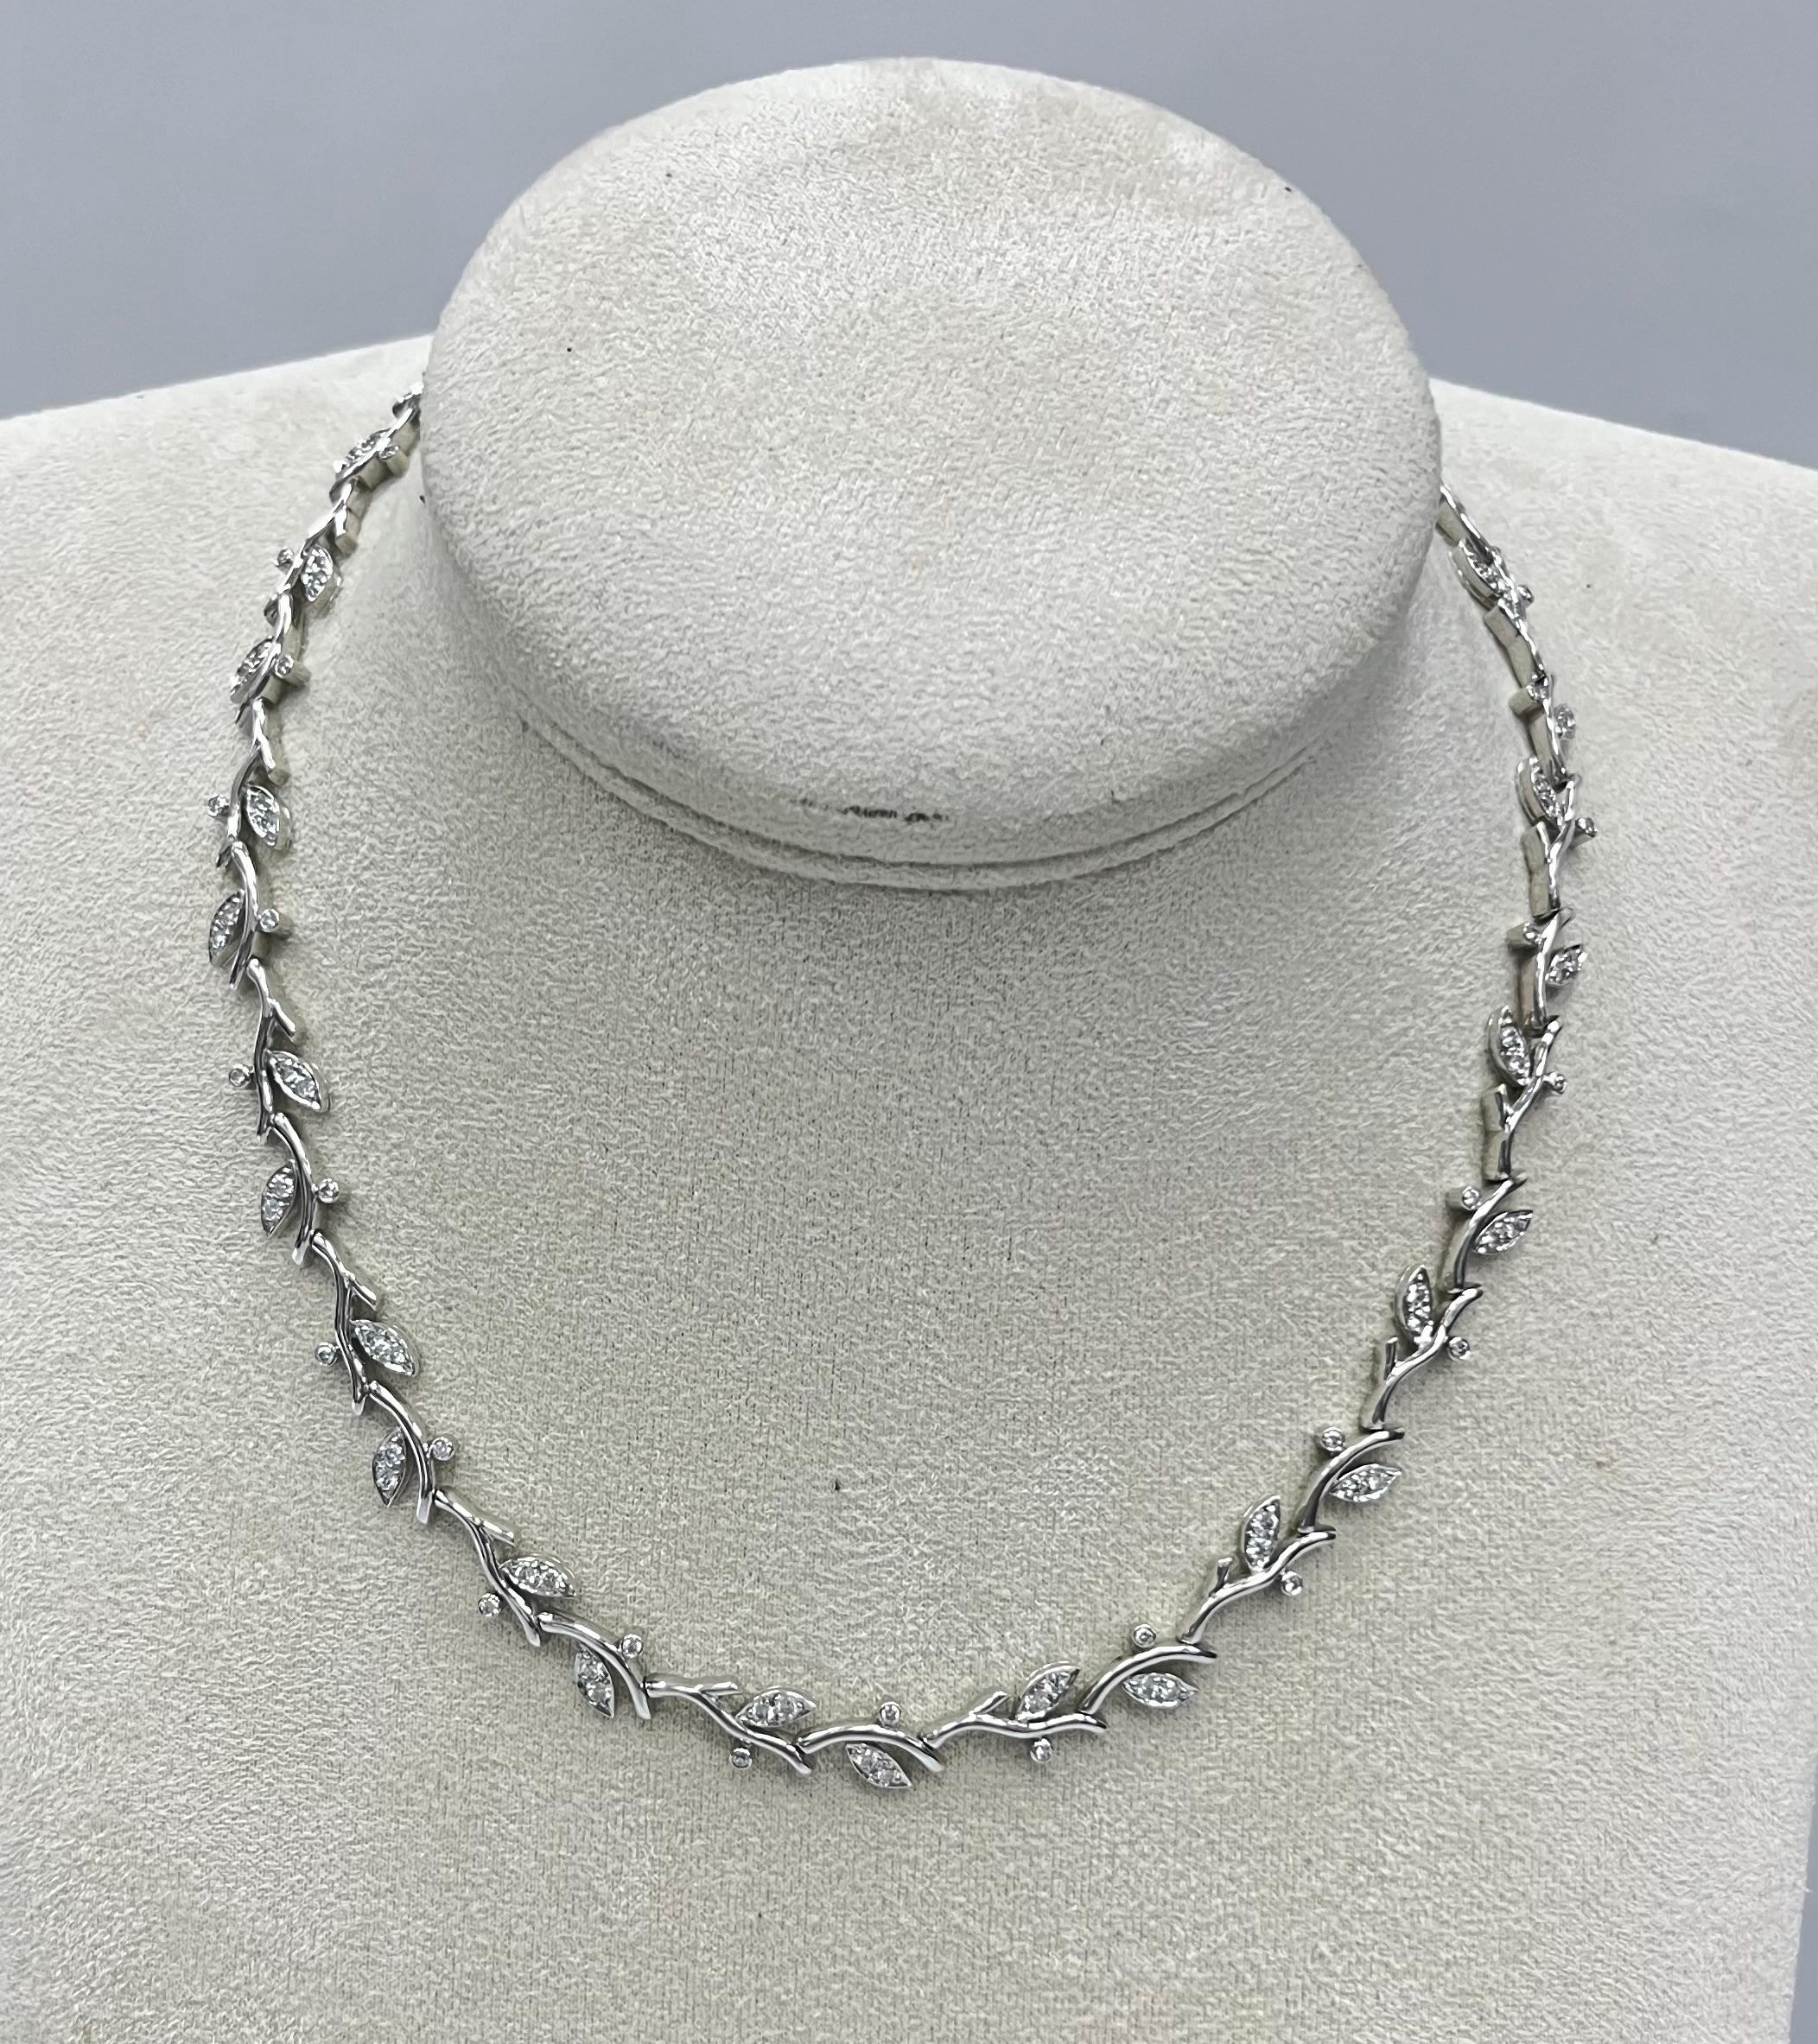 Tiffany & Co Platinum Diamond Leaf Necklace with 102 diamonds approx 4.50 carat total weight
approx D to E color and VVS to VS clarity
Marked: 1999 TIFFANY & CO PT 950
Length: 16 inches x 0.33 inch

